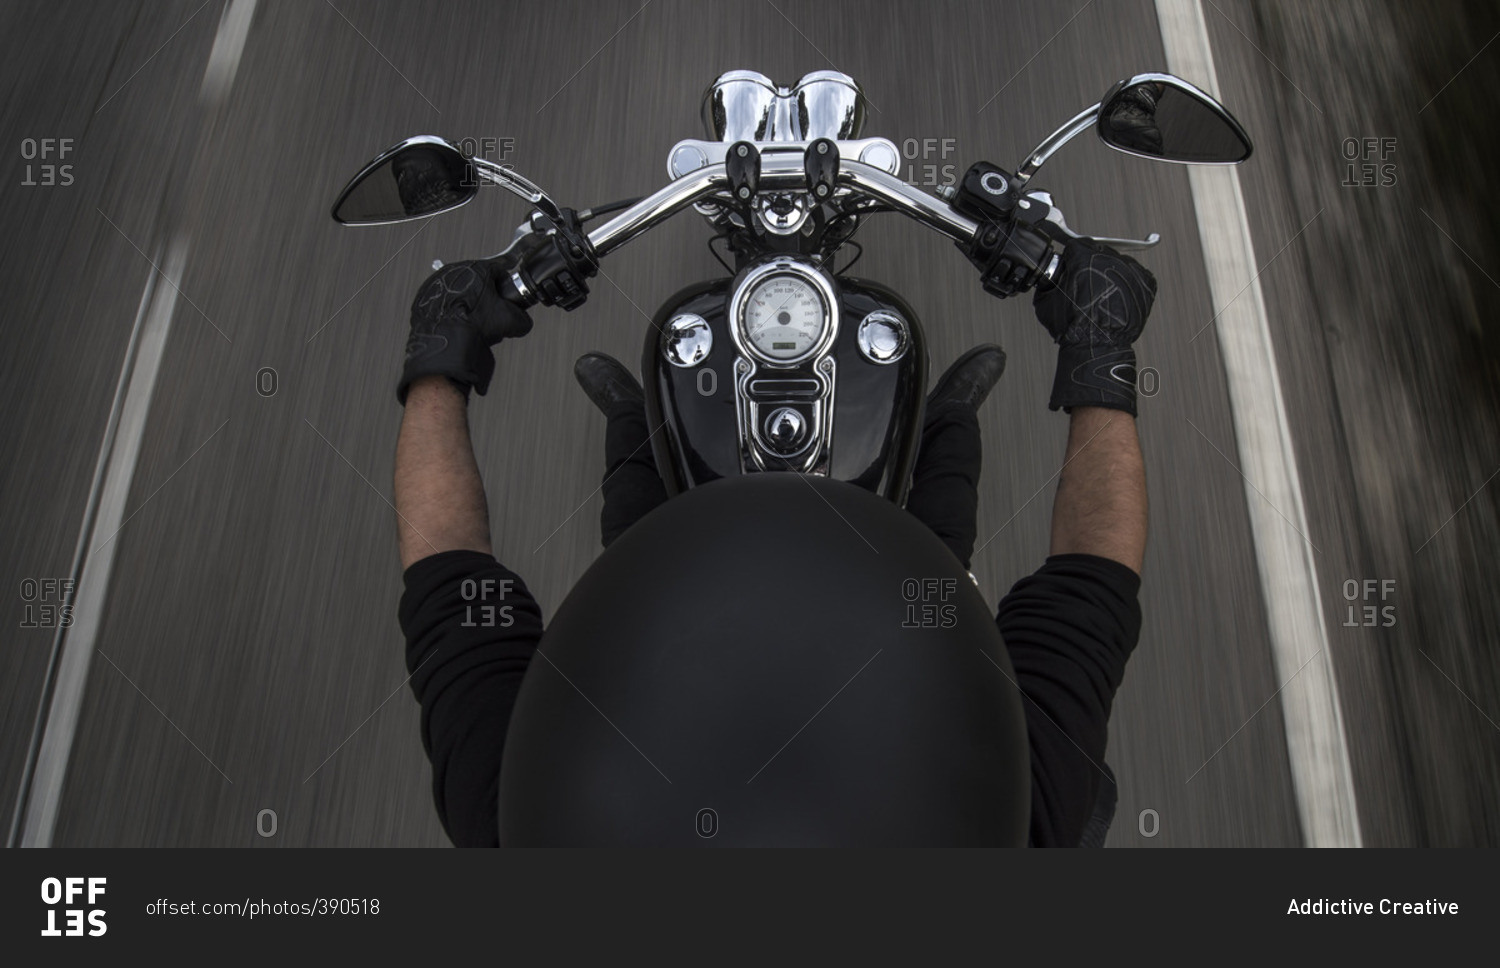 Top view of man riding motorcycle